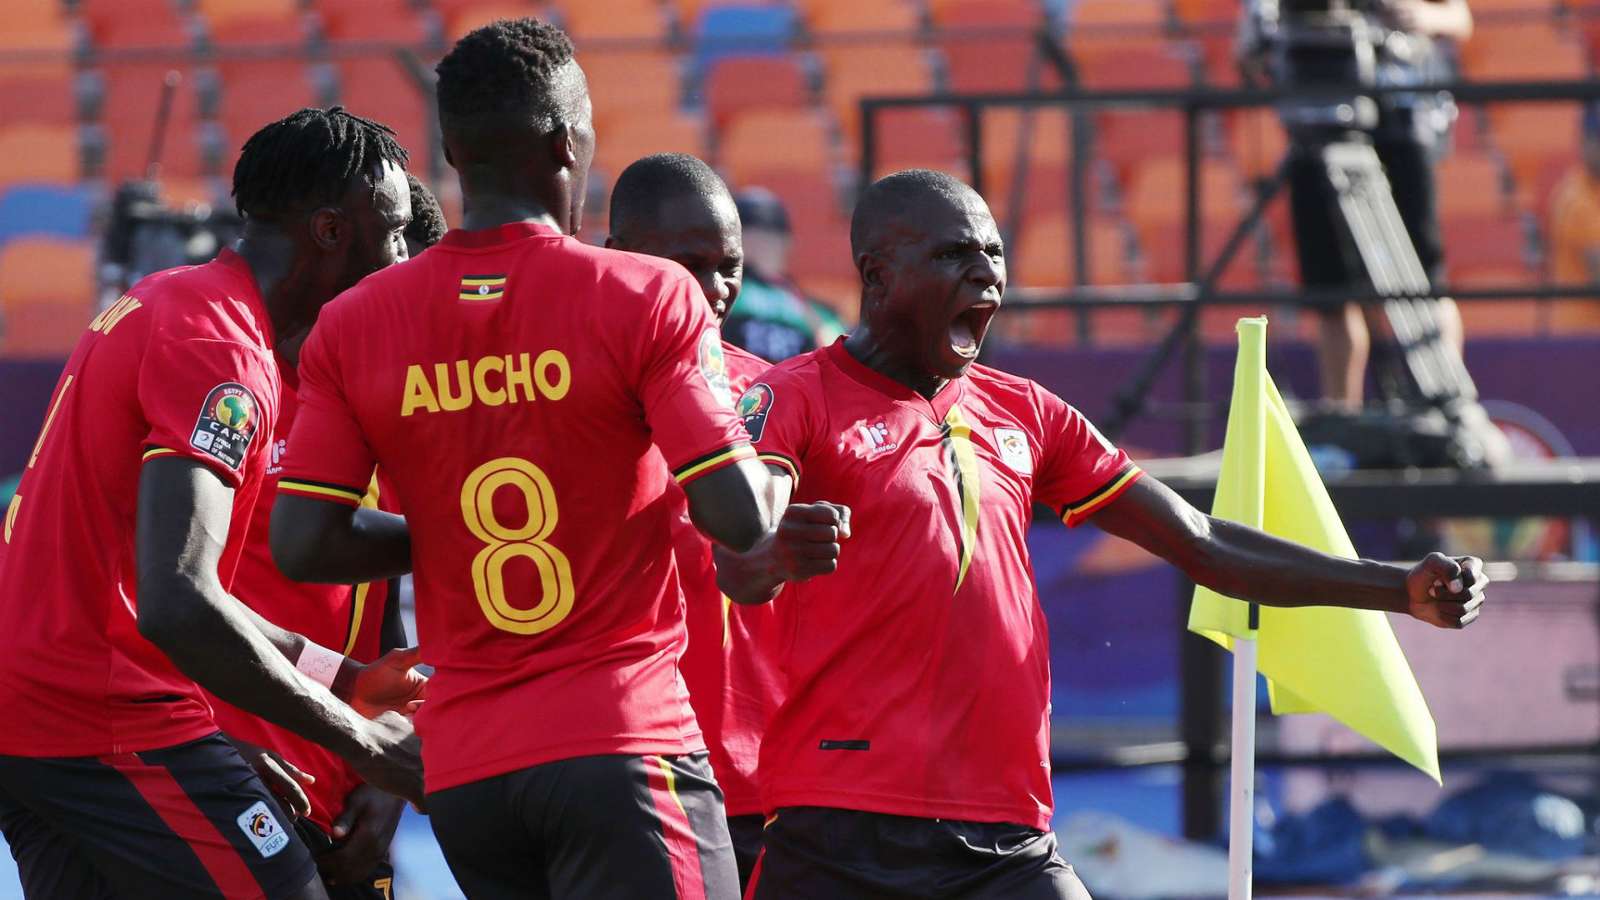 AFCON 2019 Egypt Group B - Matches, Top Teams, Kick-Off Times, Standings, Fixtures, Venues And Results